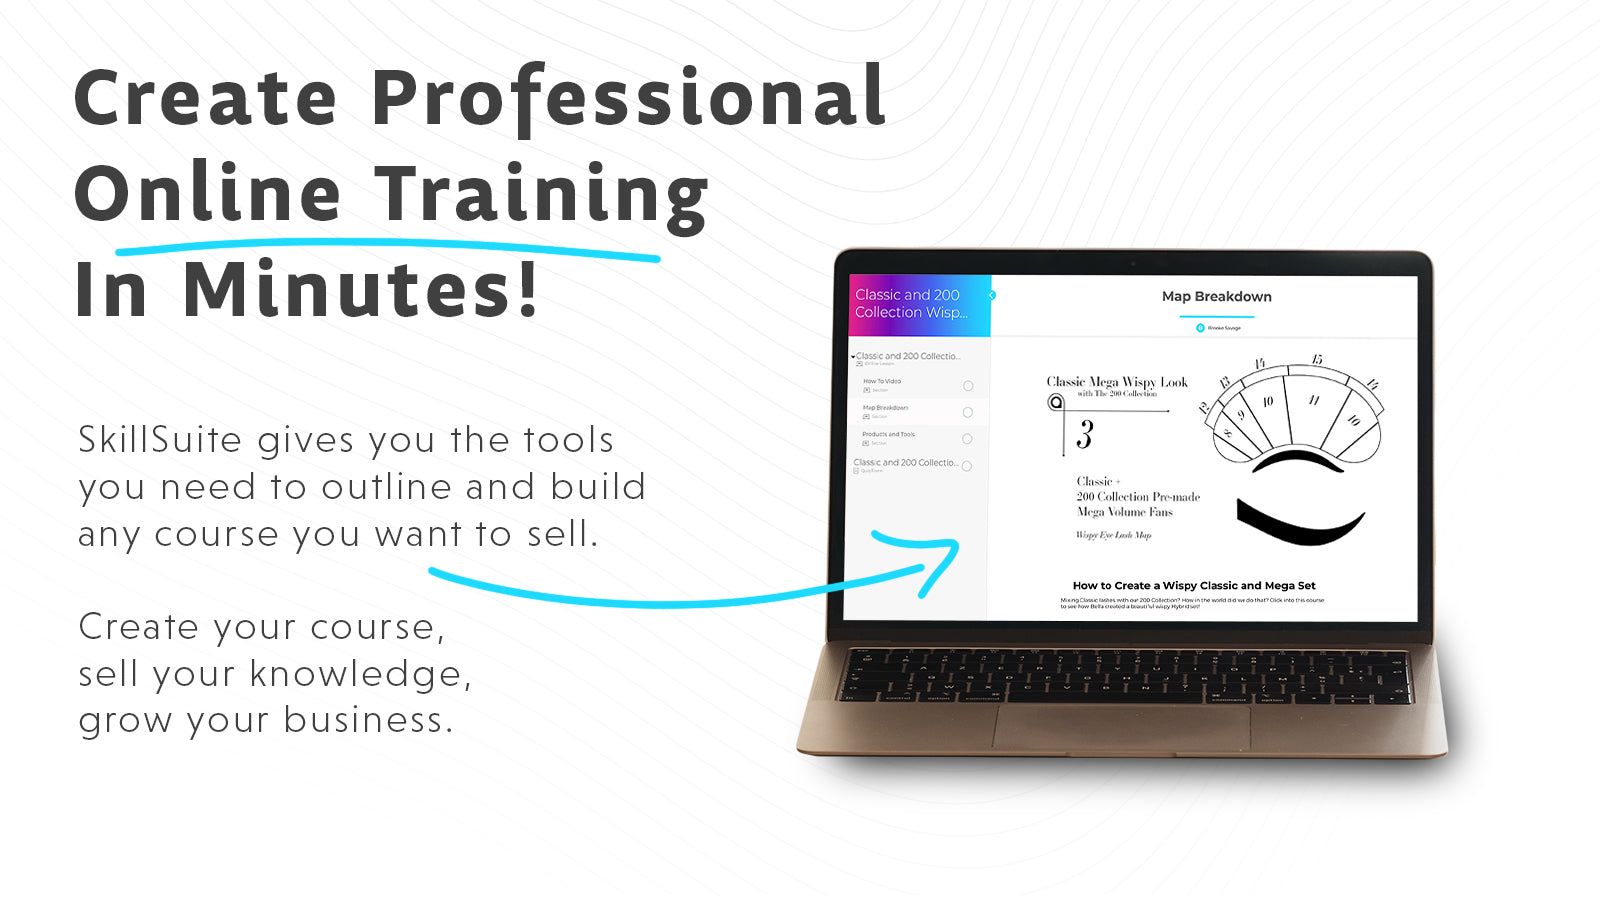 Create professional online training in minutes!